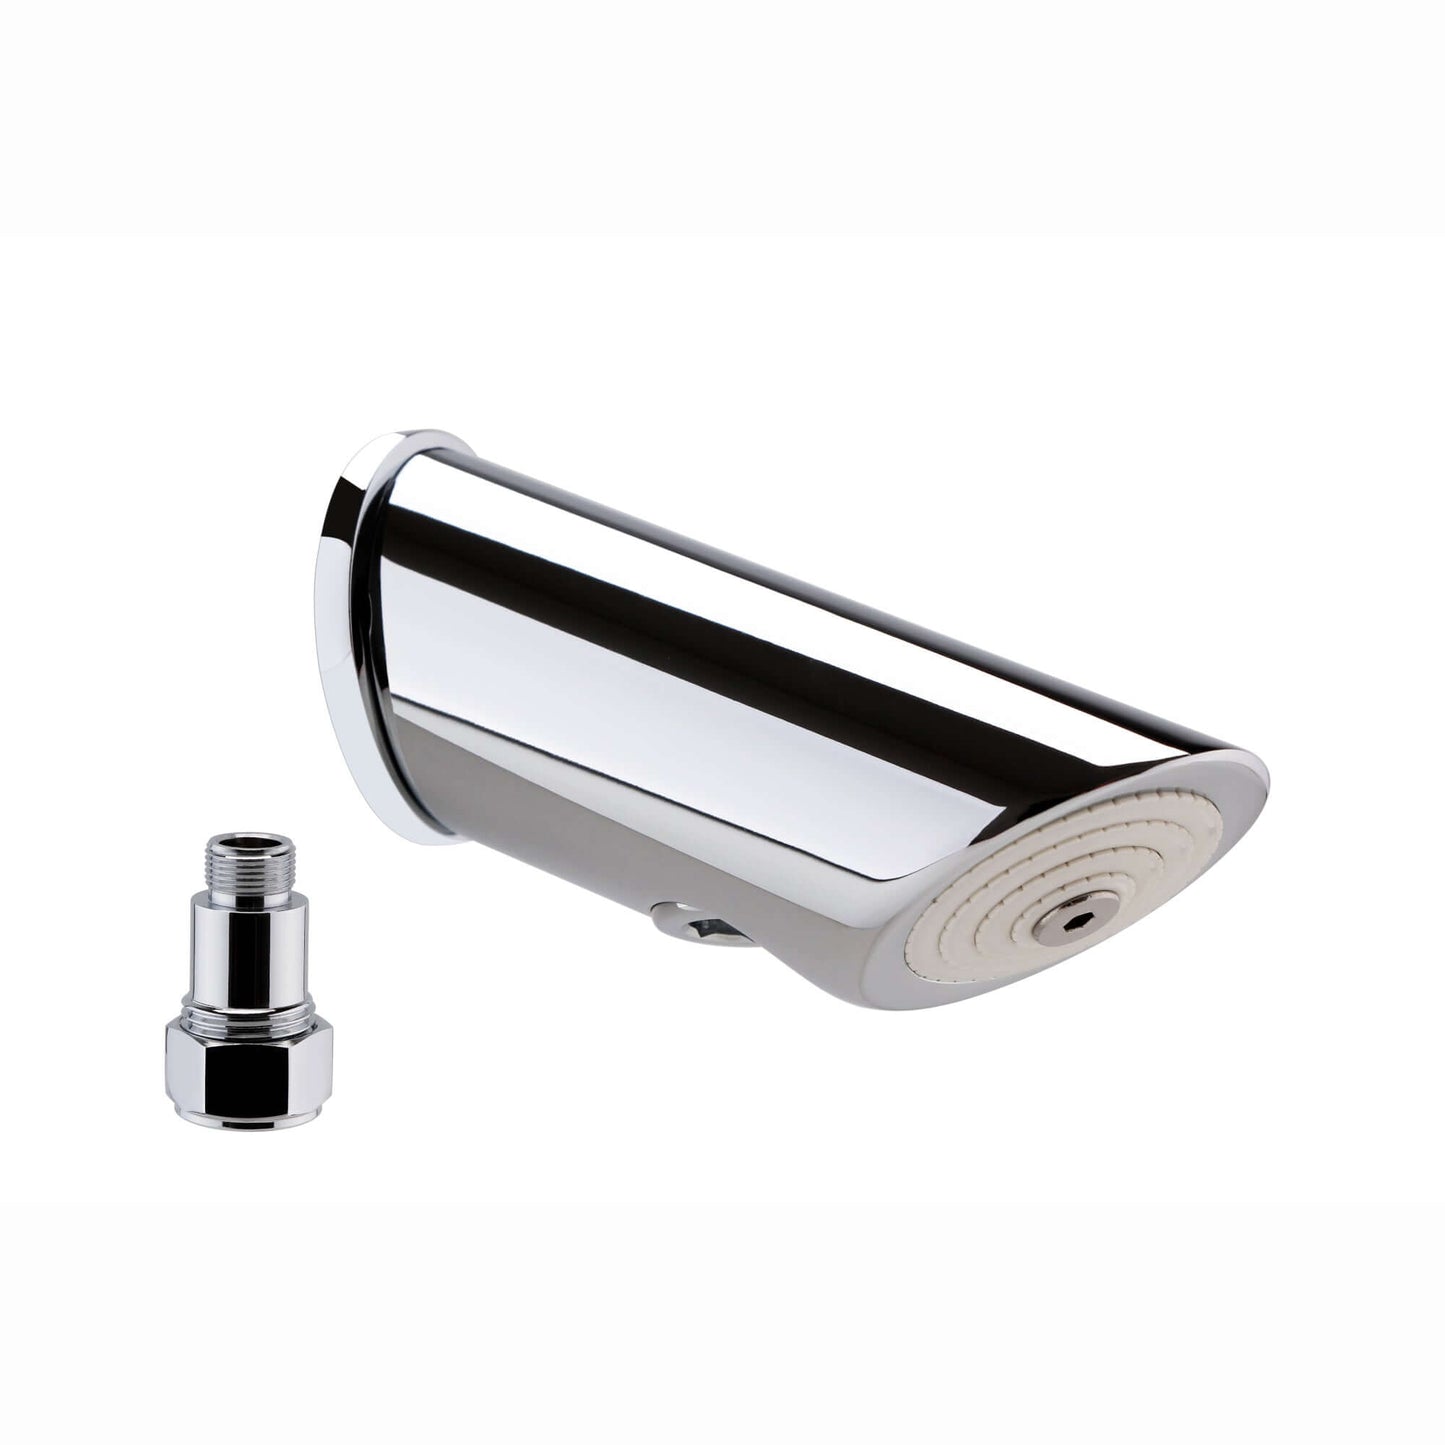 Anti vandal shower head for concealed or exposed installation - chrome